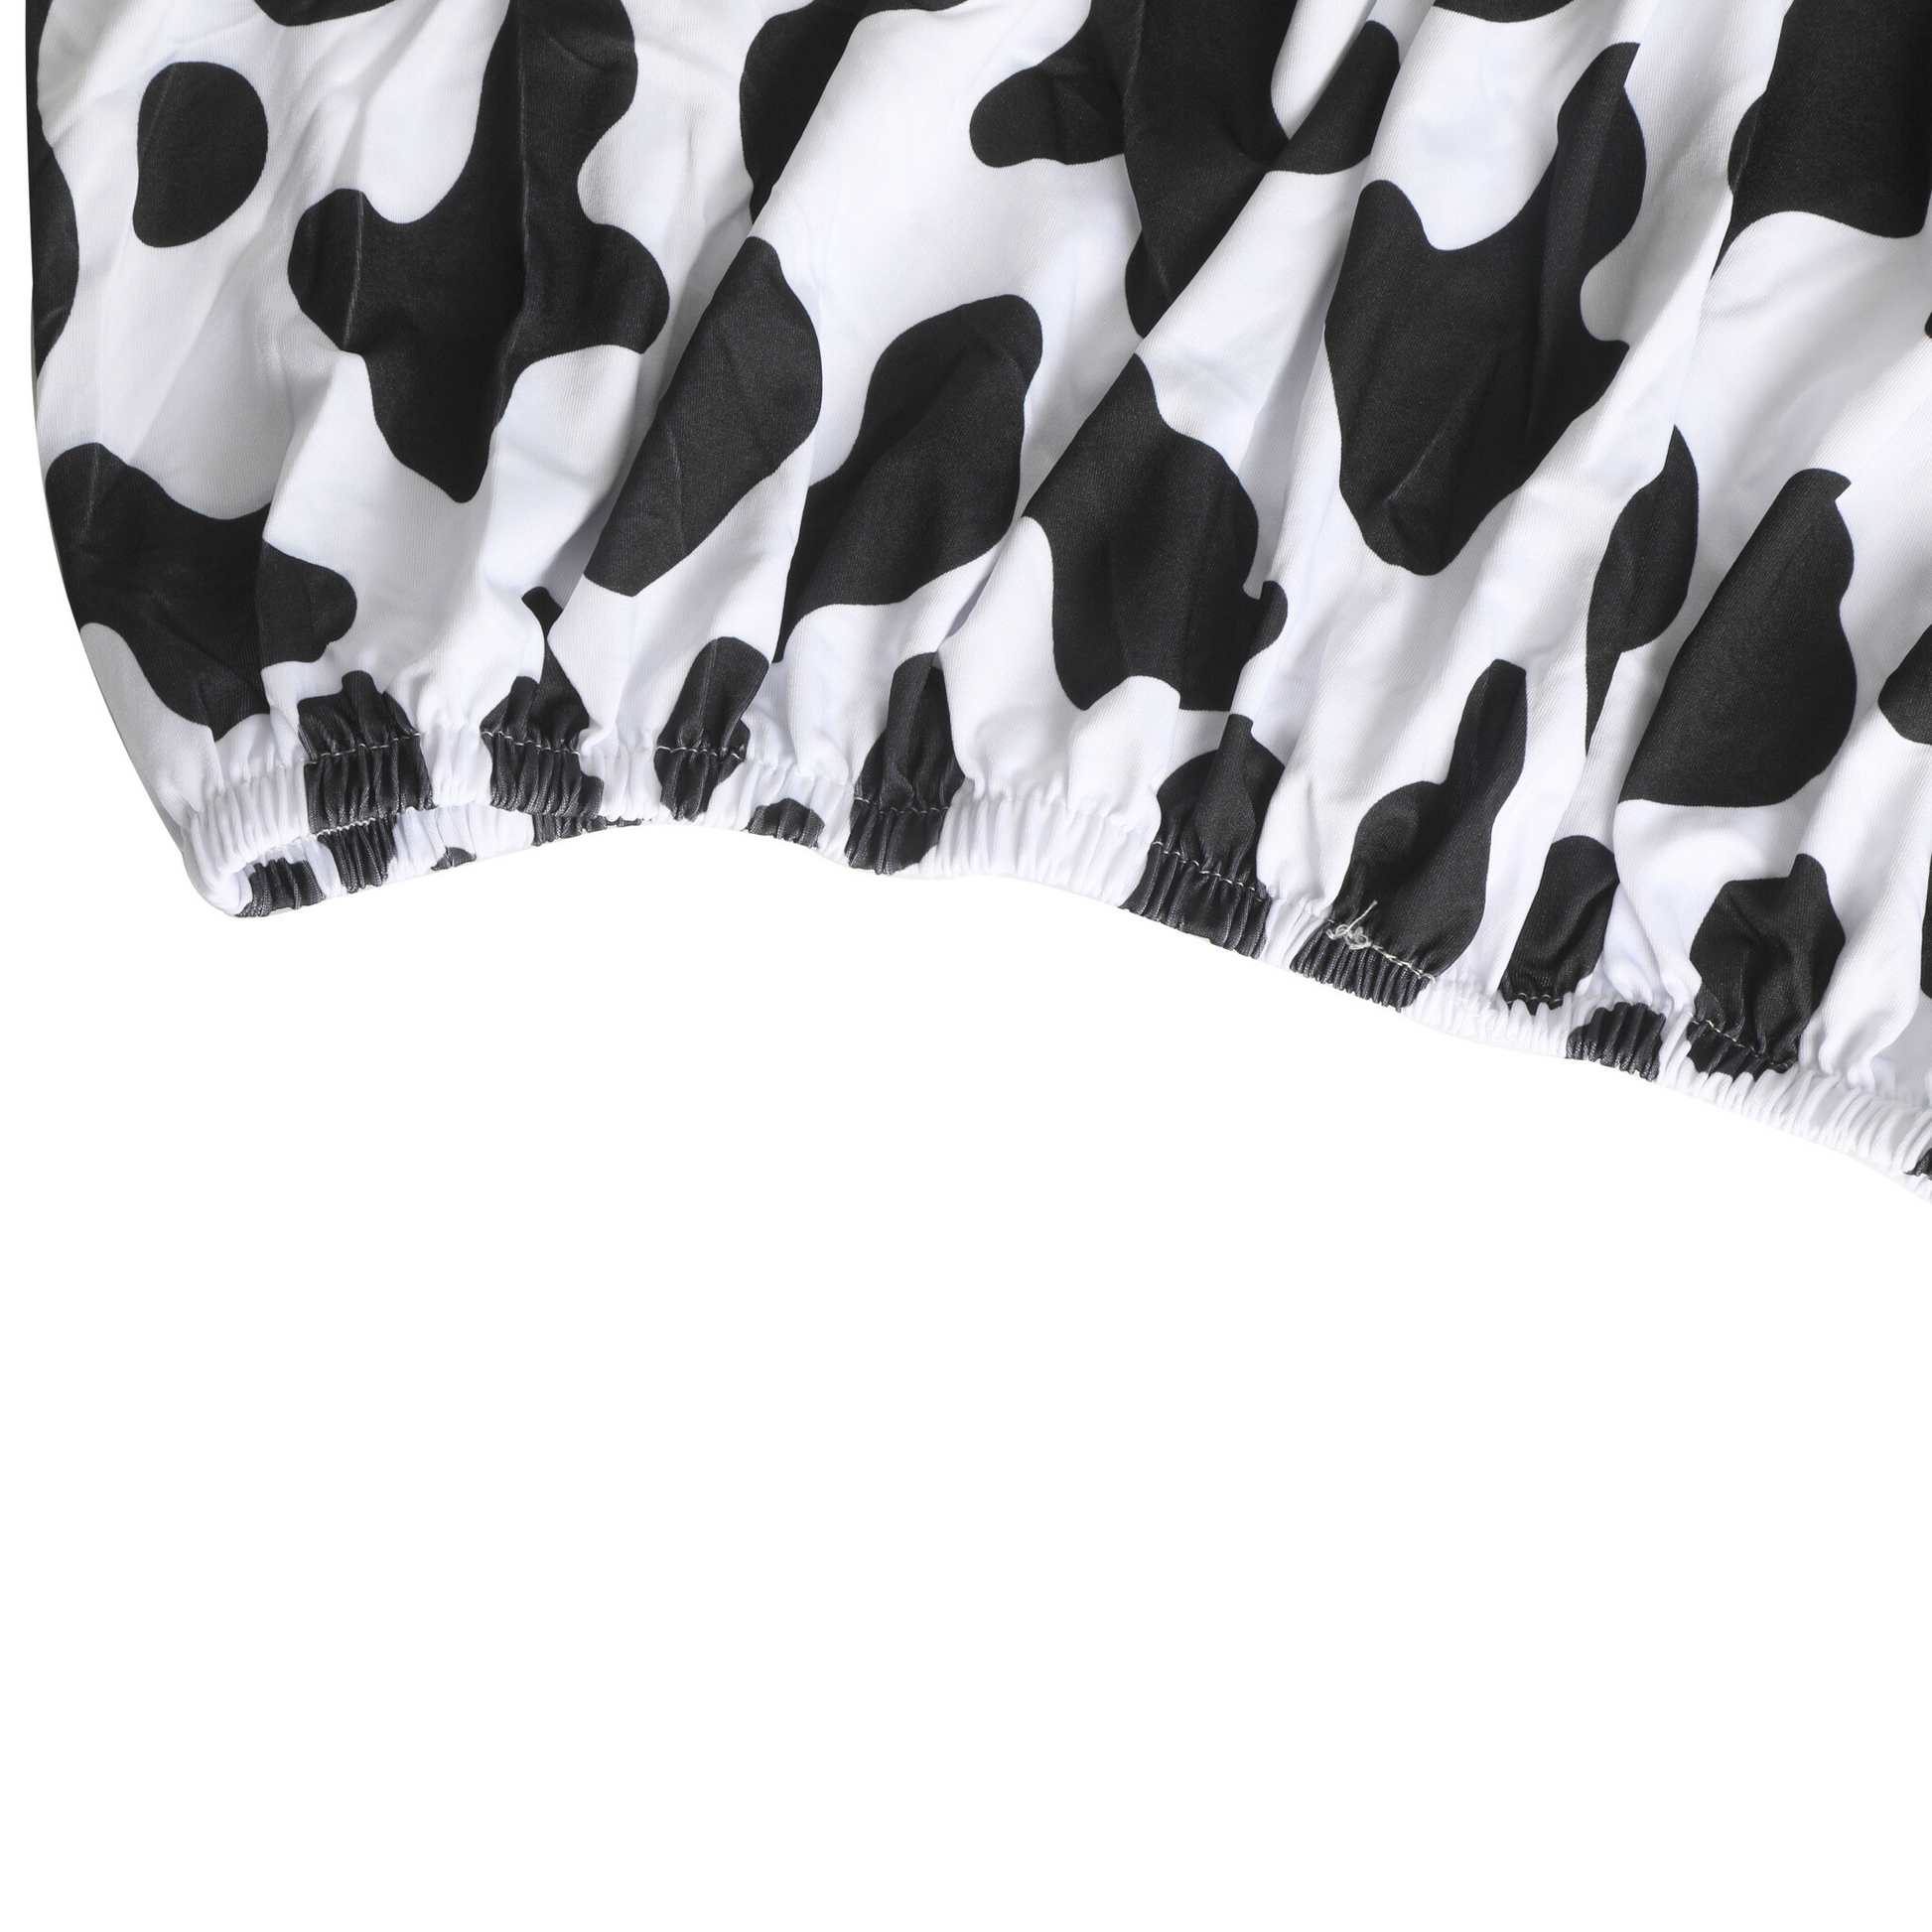 Spandex Covers for Trio Arch Frame Backdrop 3pc/set - Cow Animal PrintSpandex Covers for Trio Arch Frame Backdrop 3pc/set - Cow Animal Print